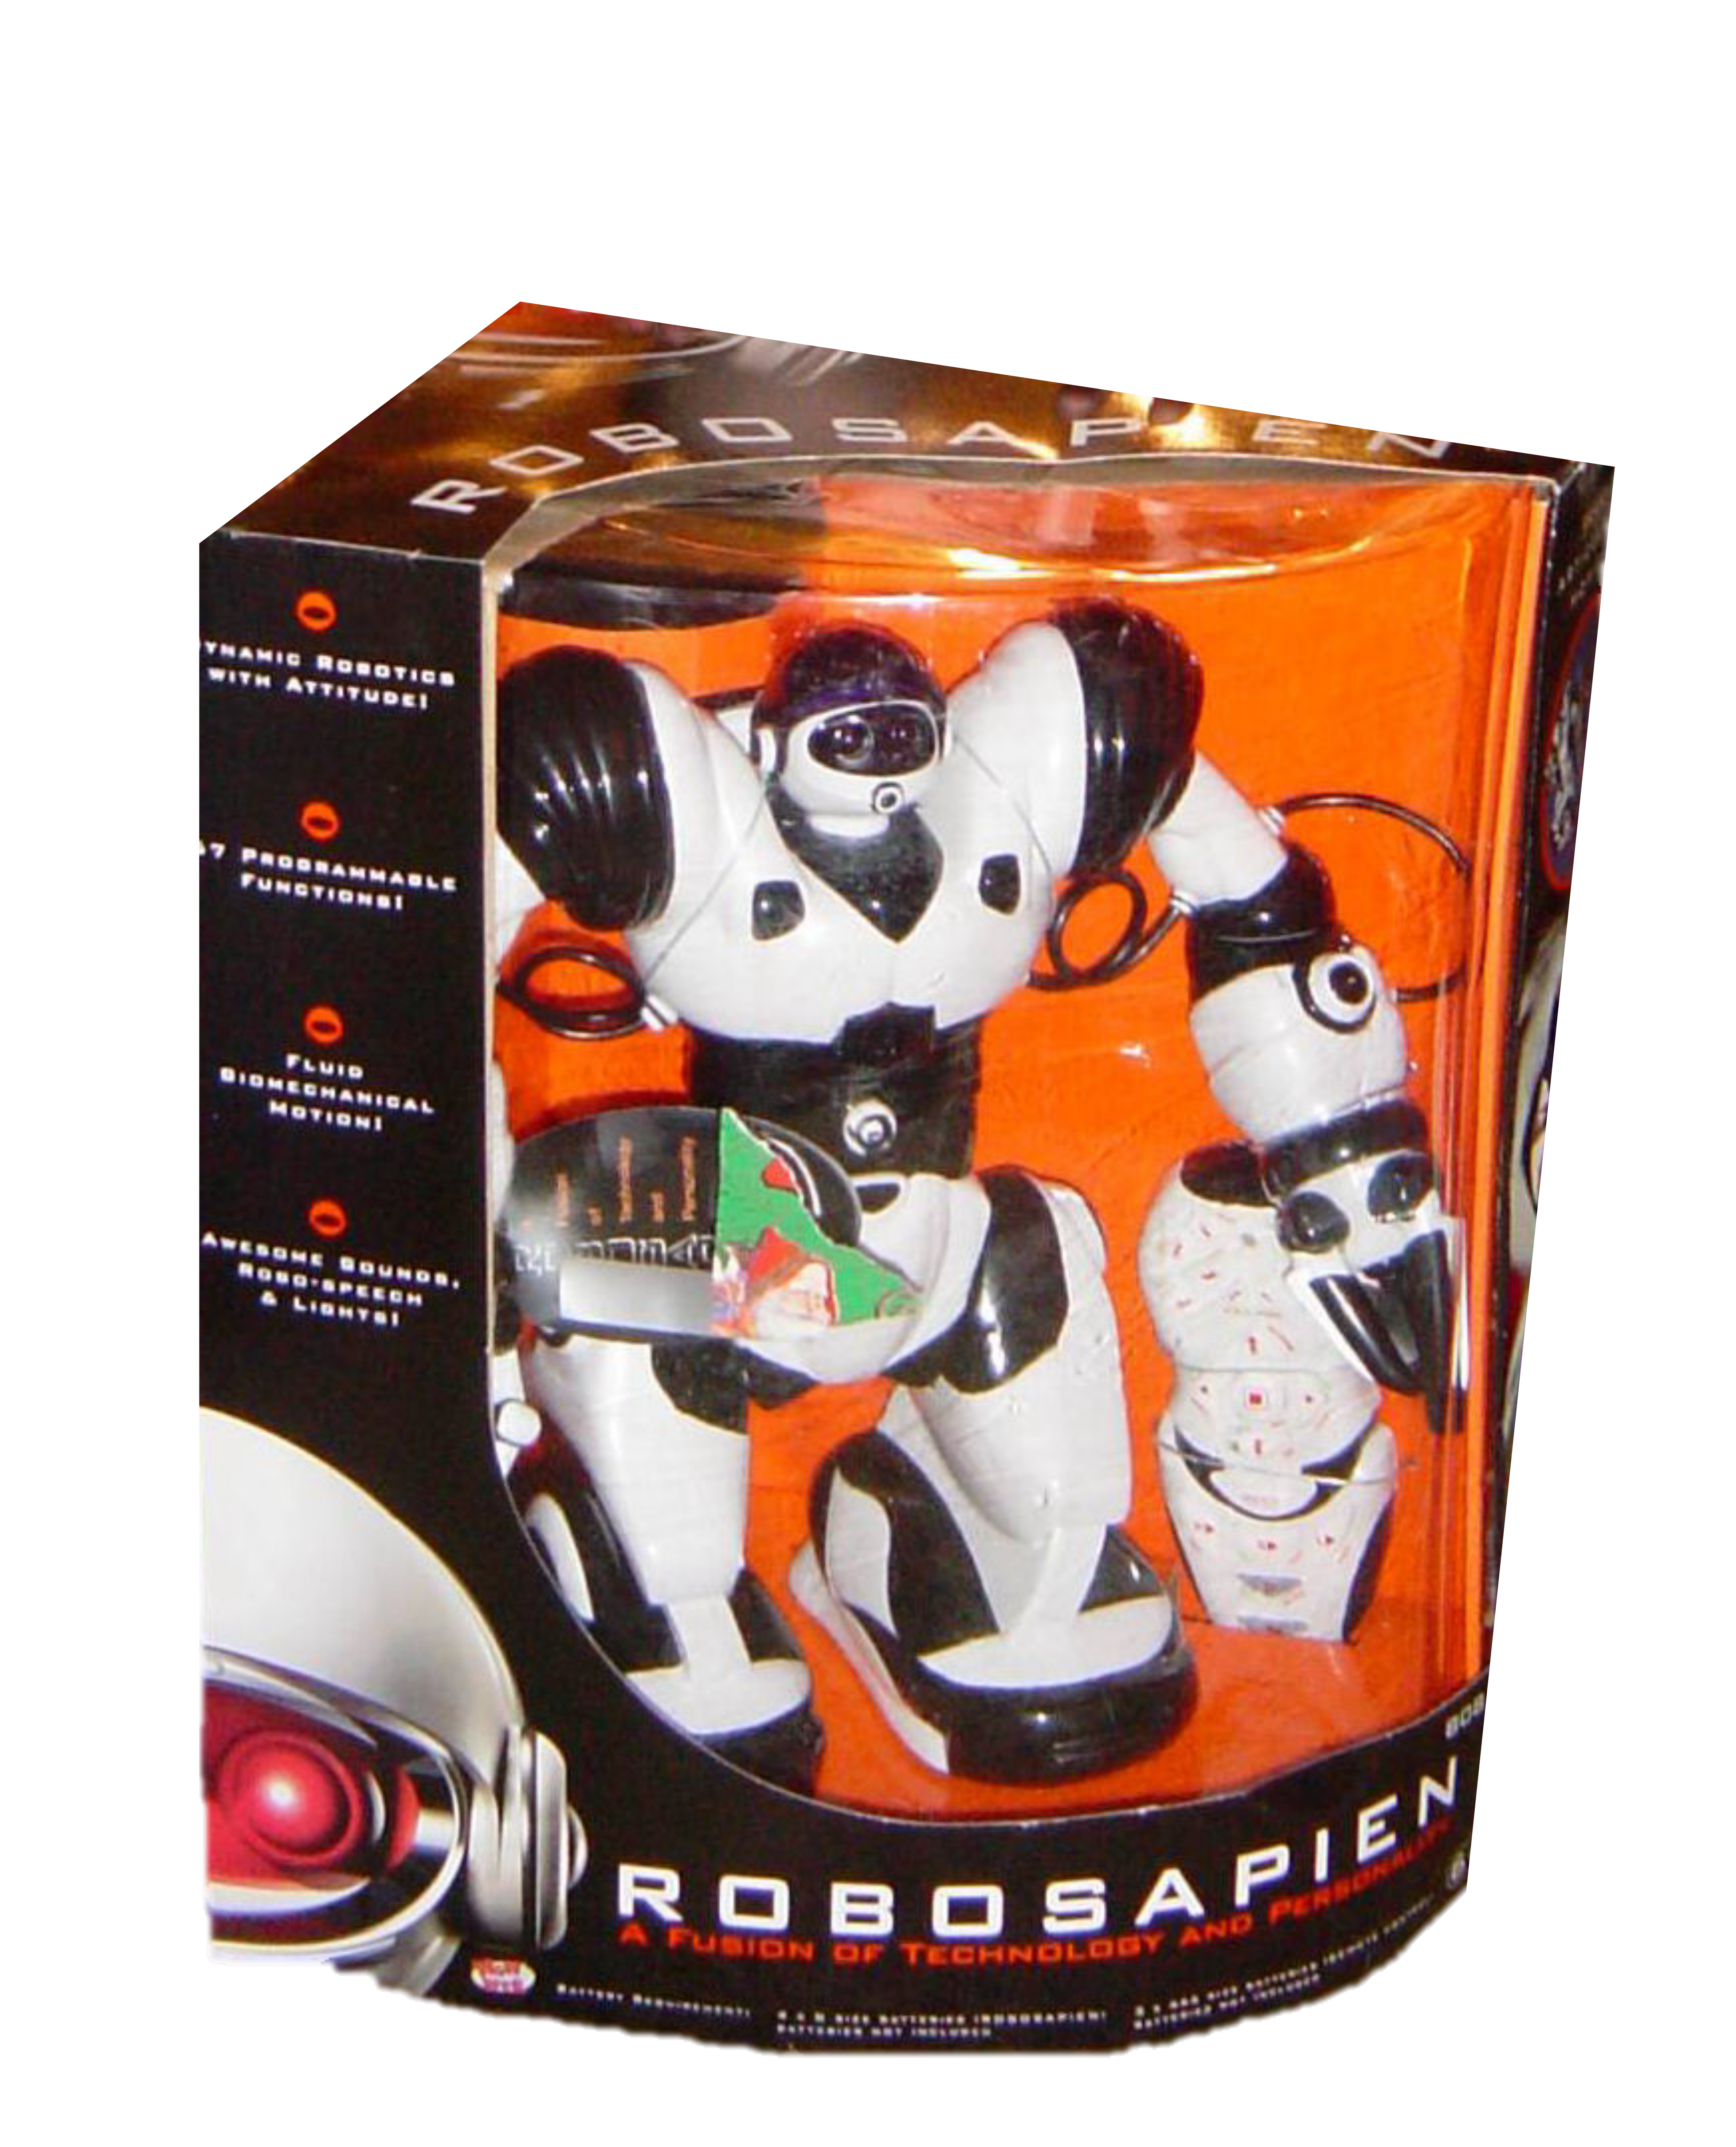 A photograph of a Robosapien, similar to the one pictured in figure 14.1, in its original packaging on a white background. The front of the package says “Robosapien; A Fusion of Technology and Personality.”